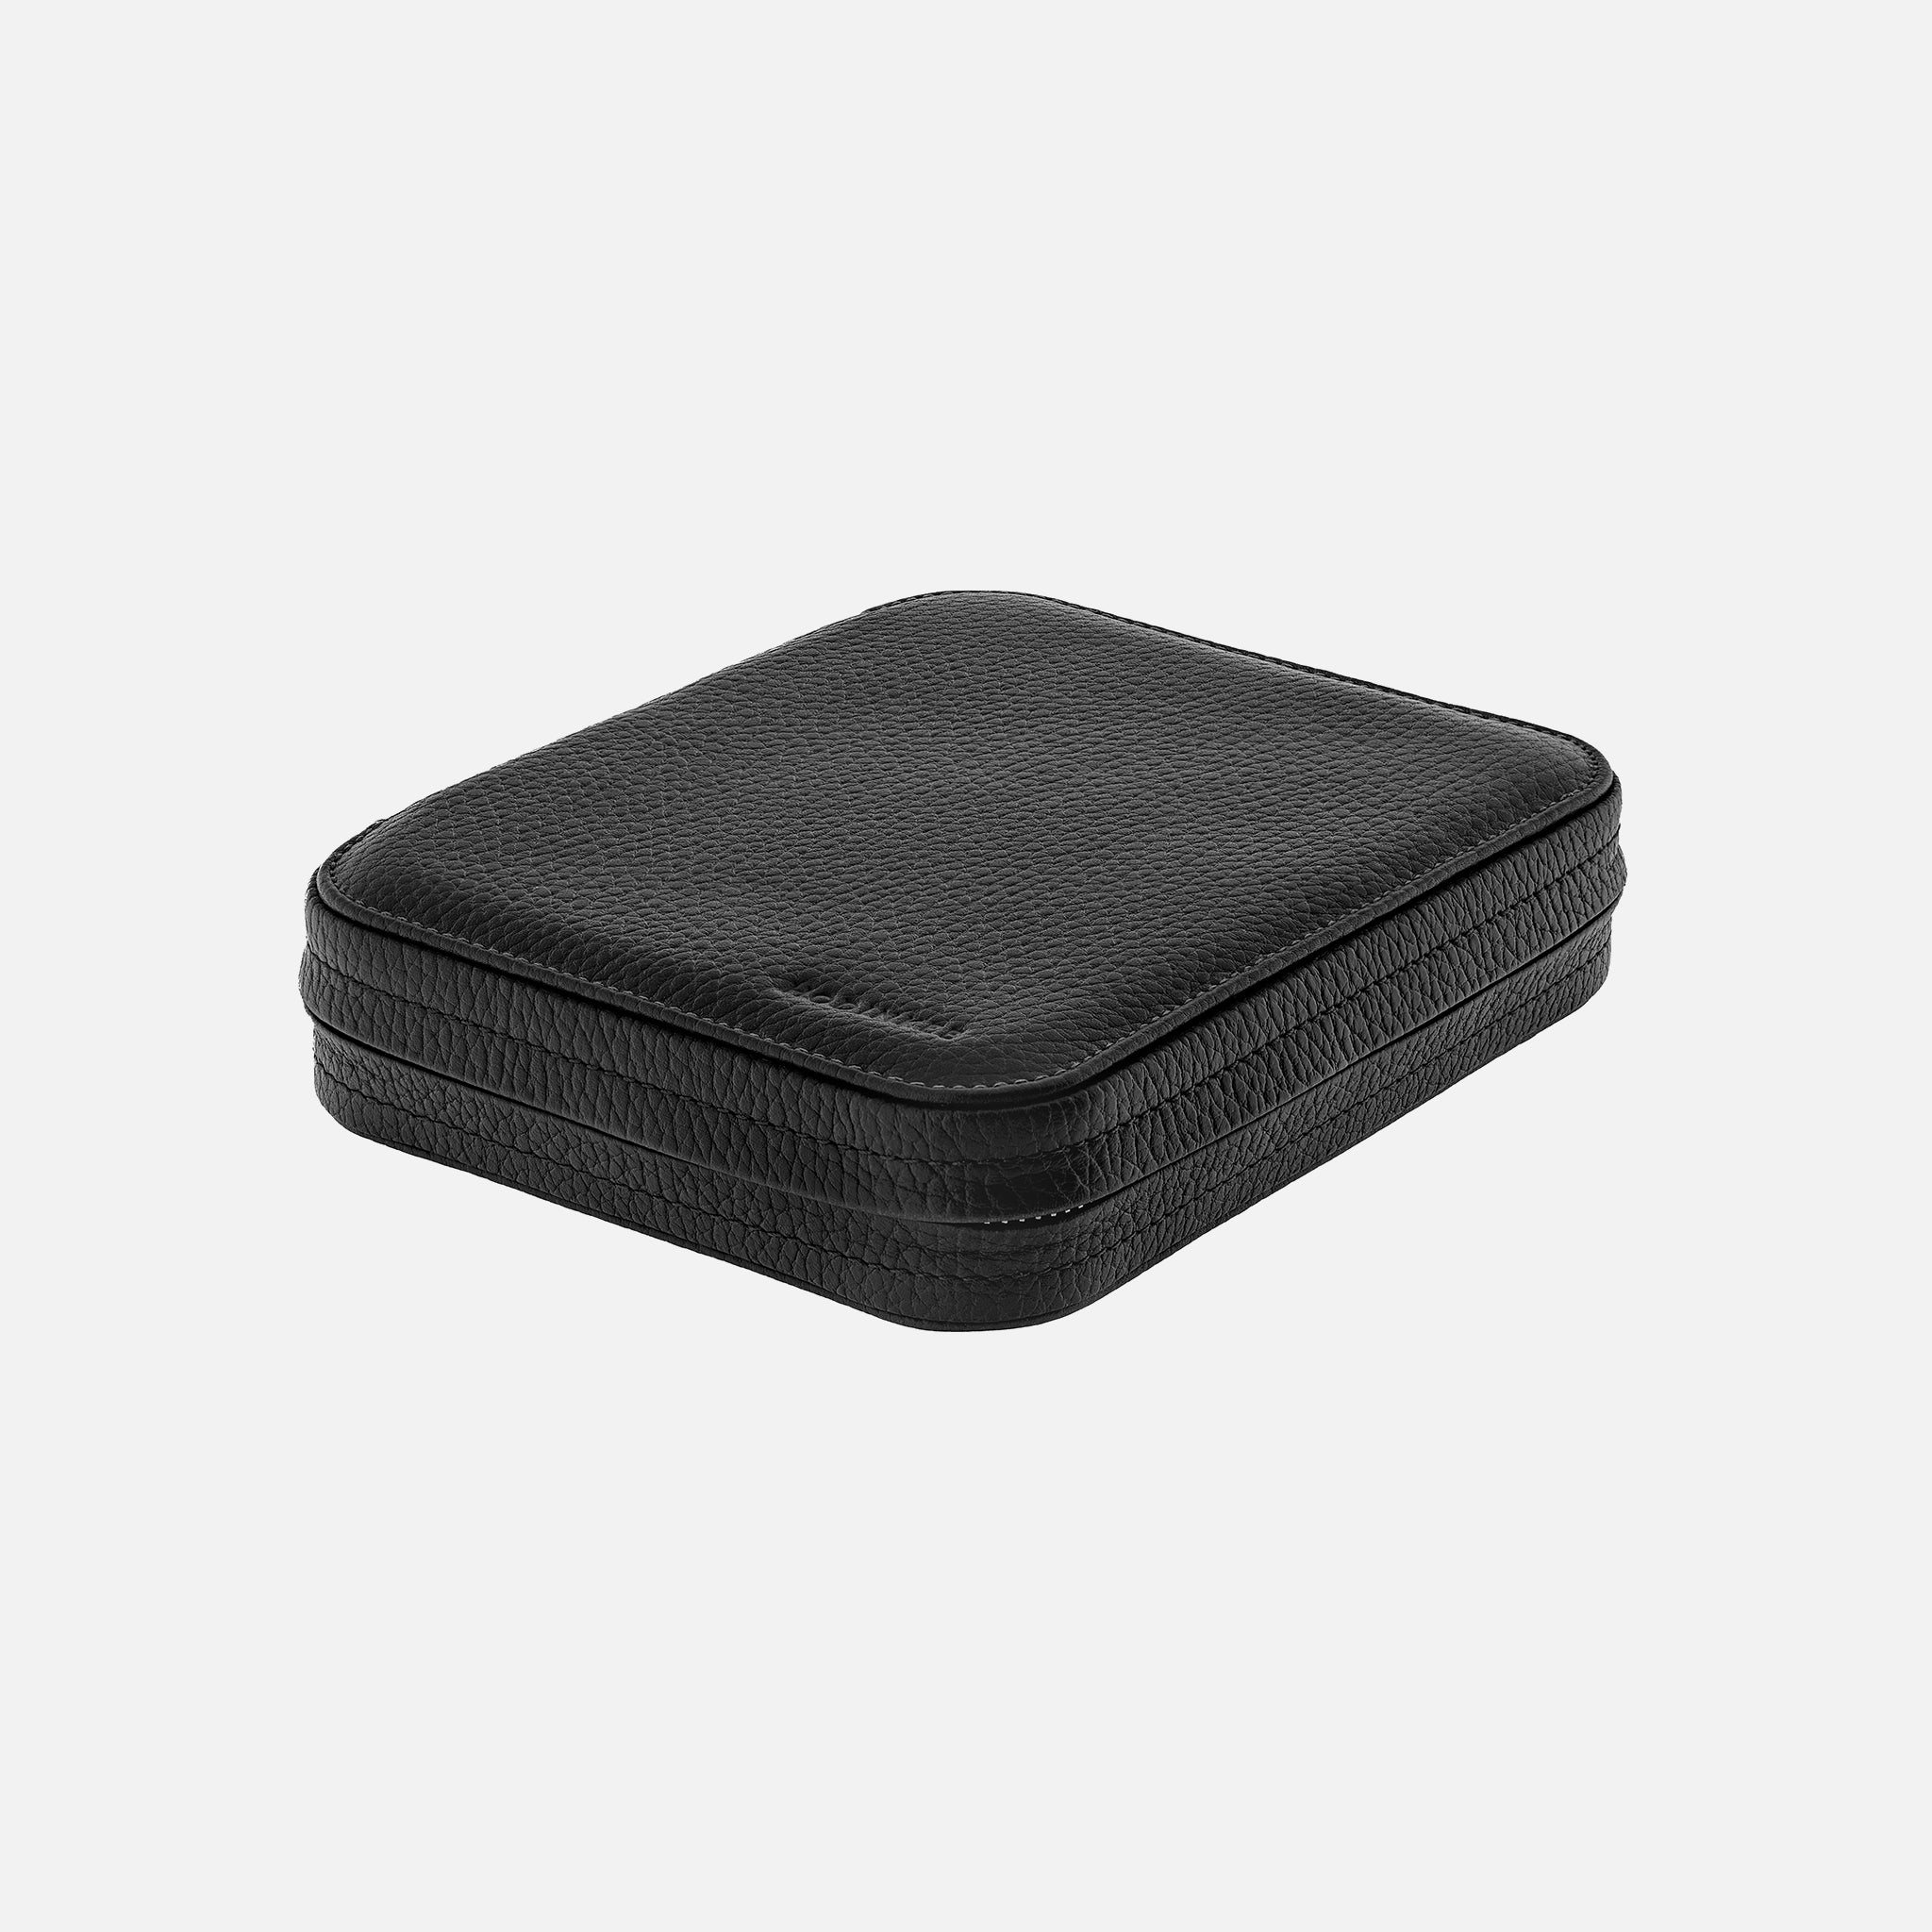 Hodinkee's moulded leather cases are a plush home for your